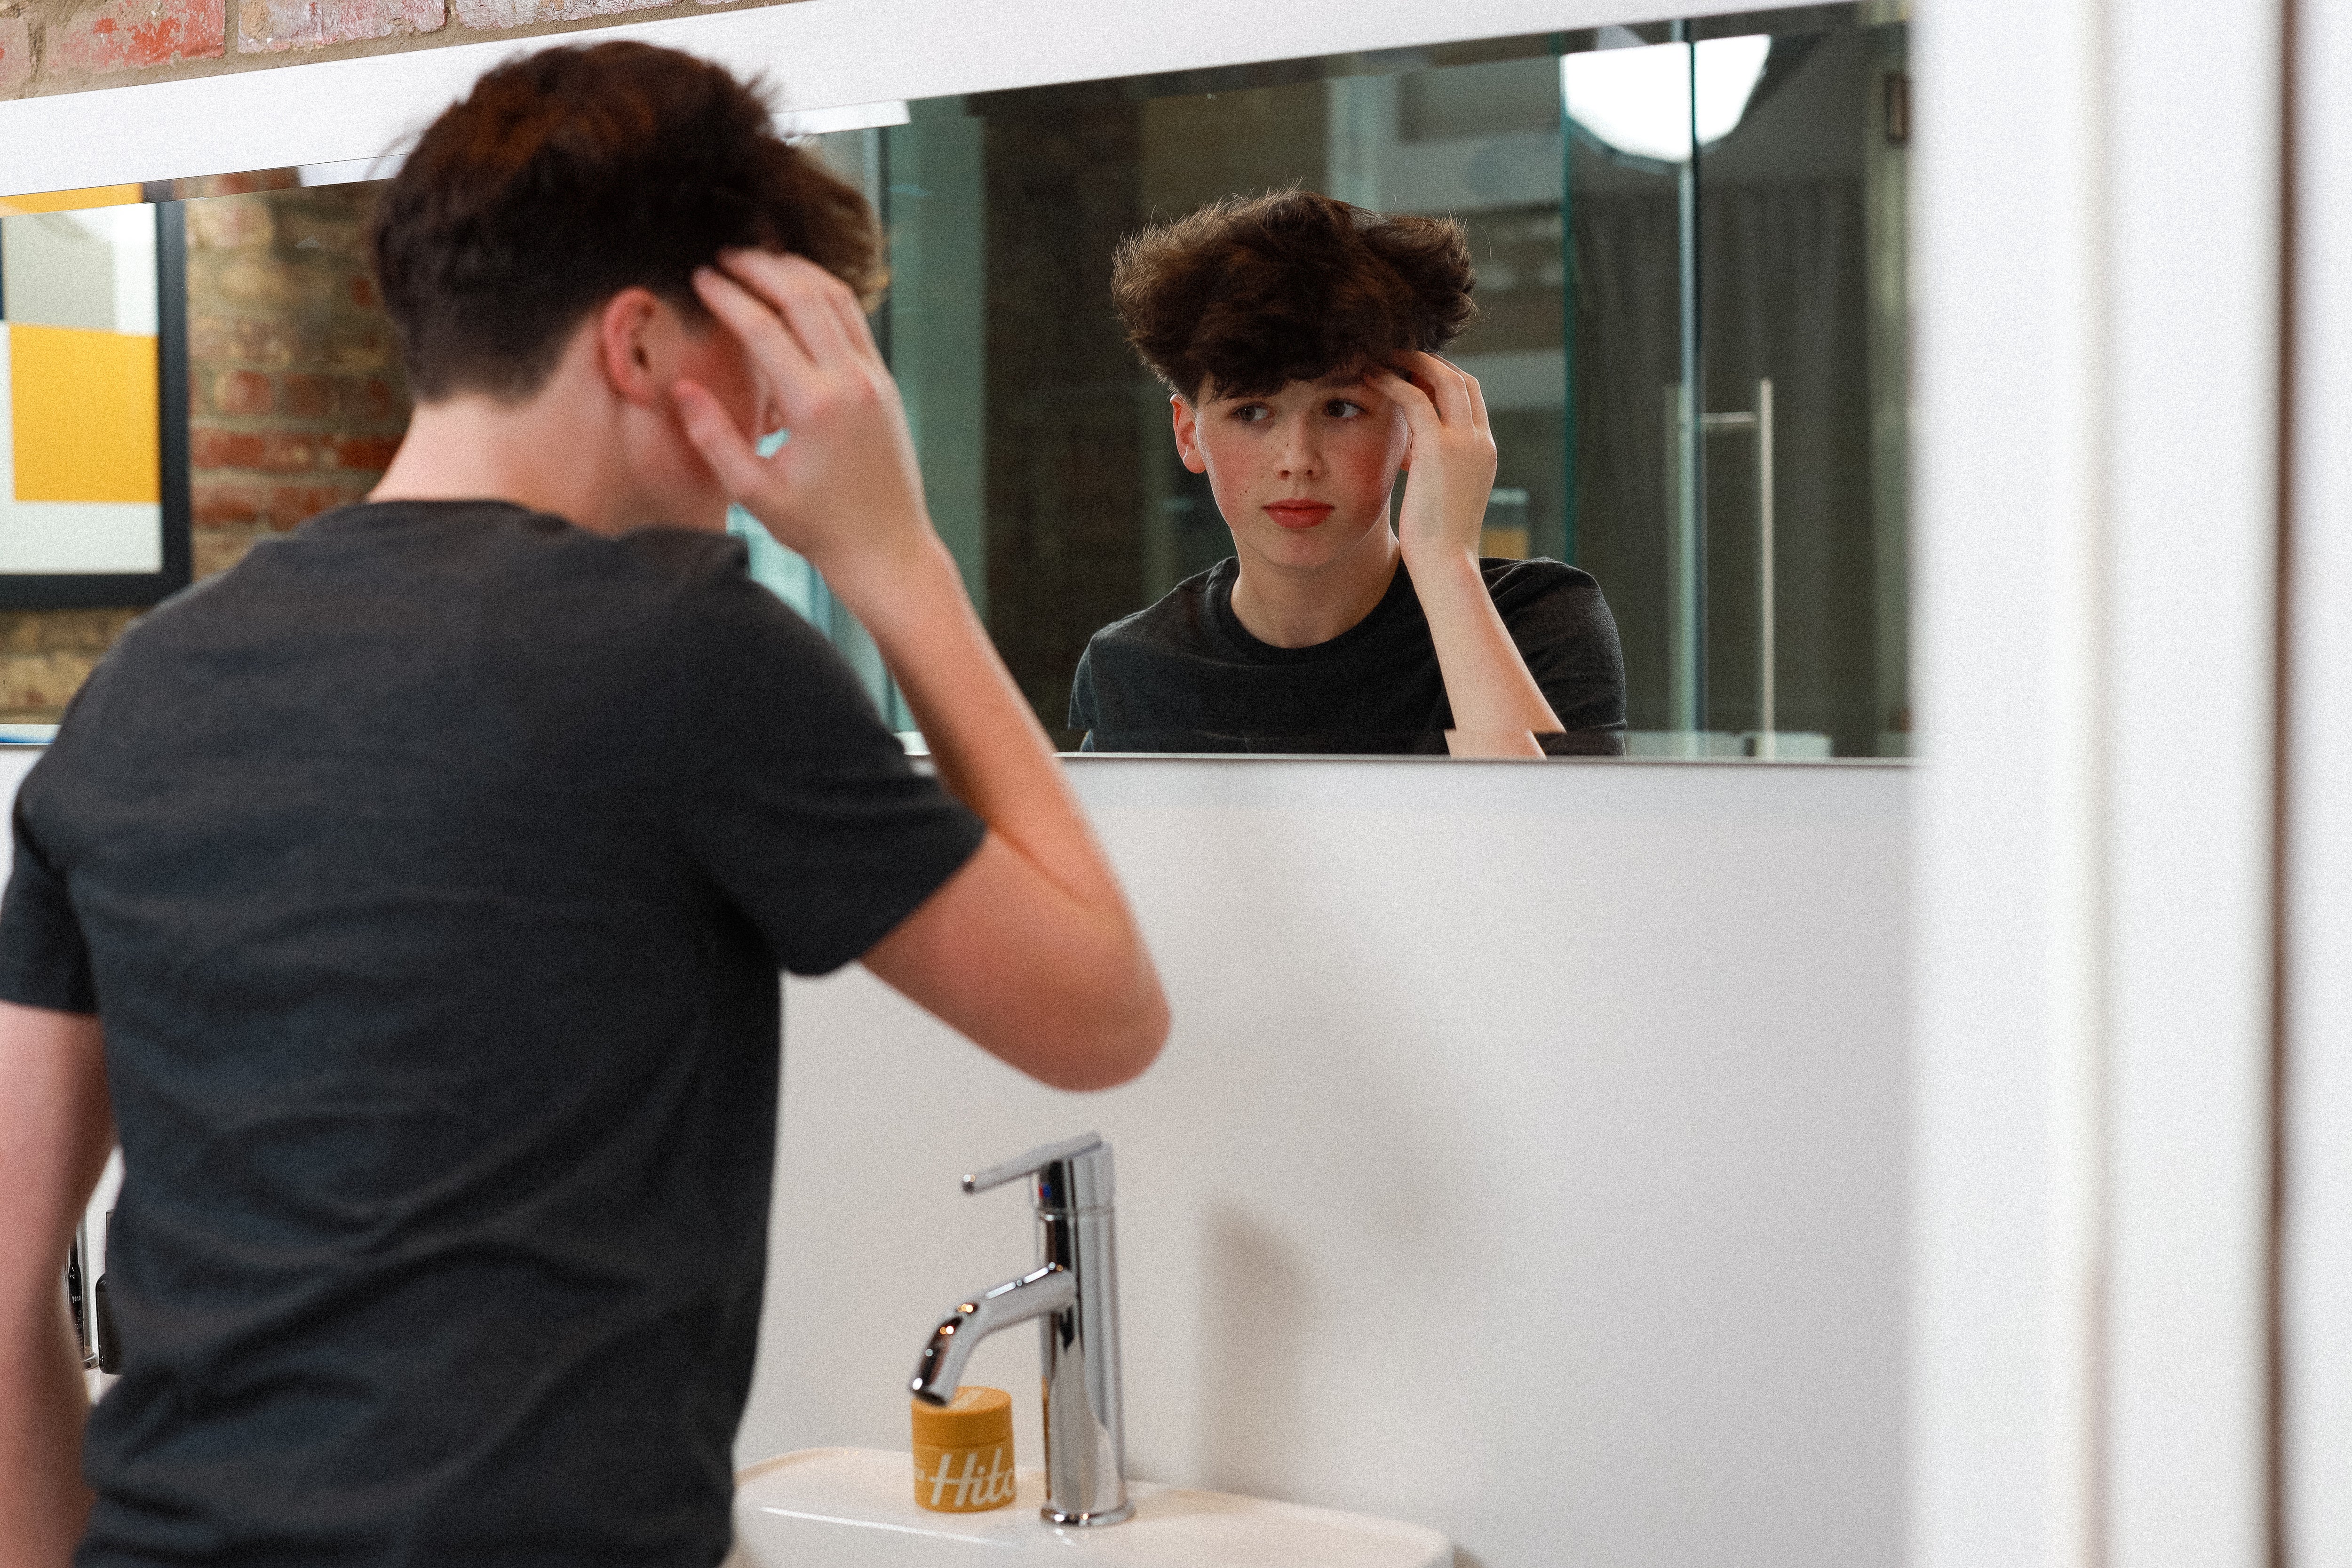 Young boy styling his medium length hair in front of mirror.